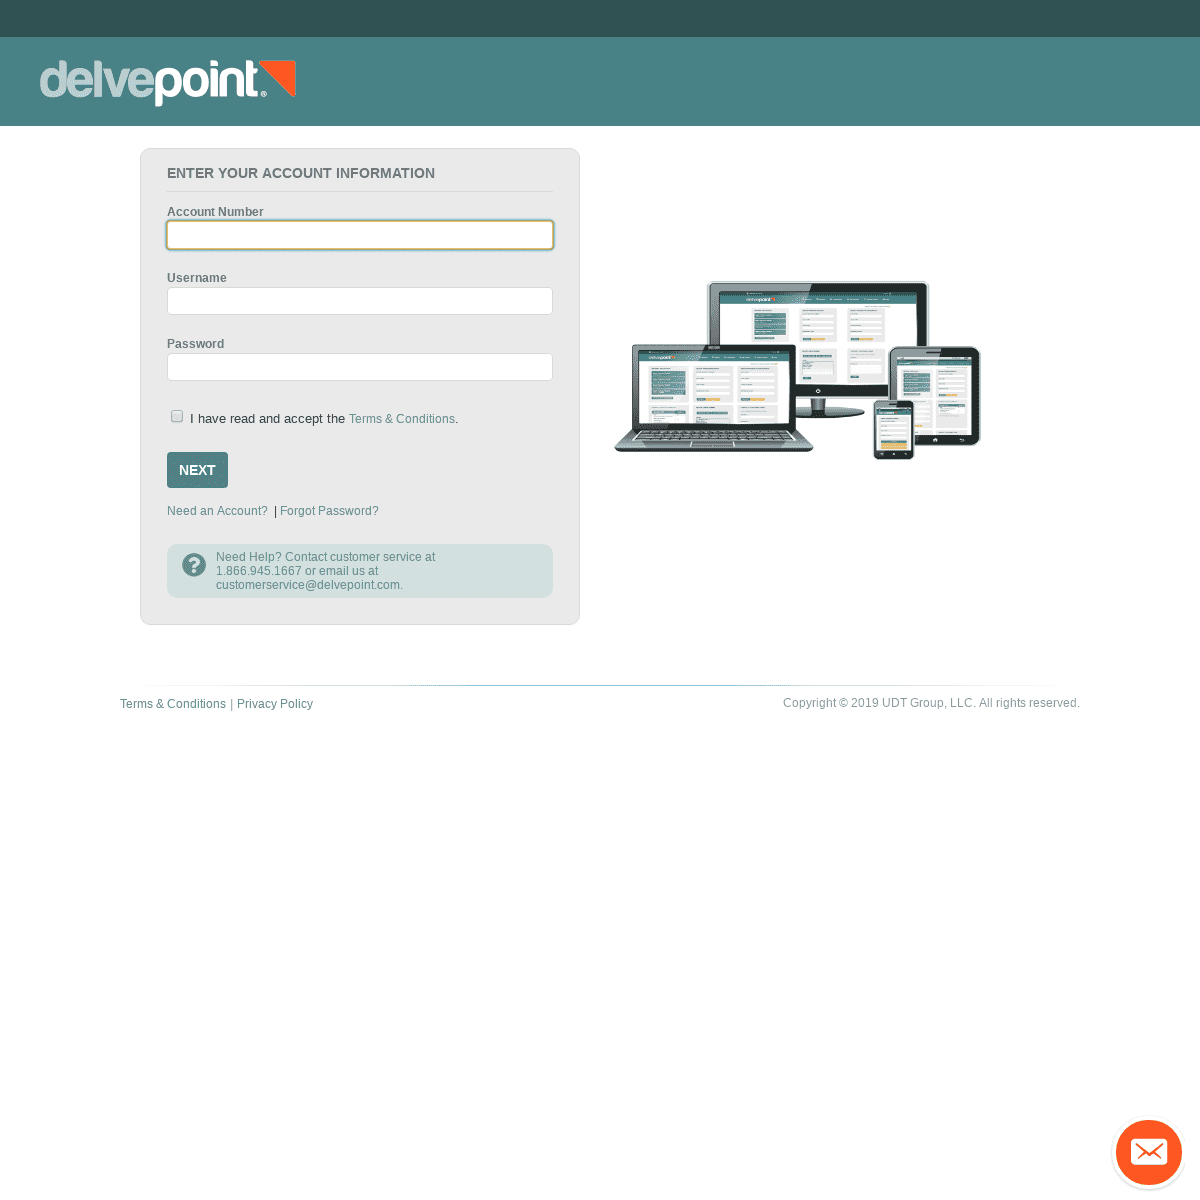 A complete backup of delvepoint.com